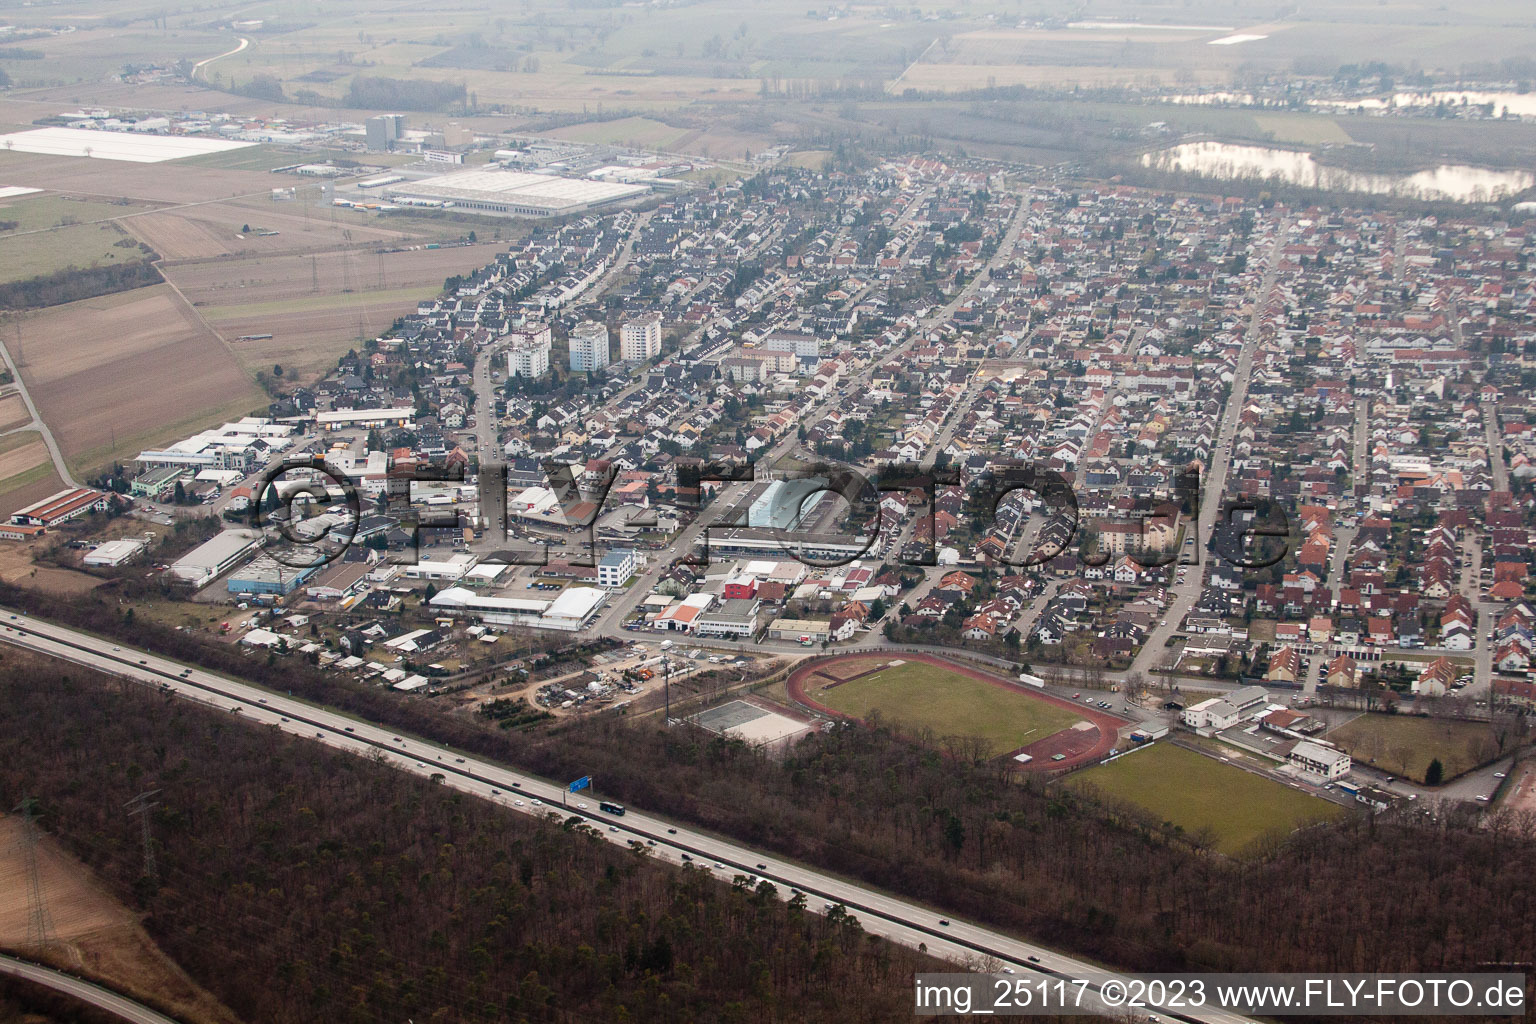 Ketsch in the state Baden-Wuerttemberg, Germany seen from above